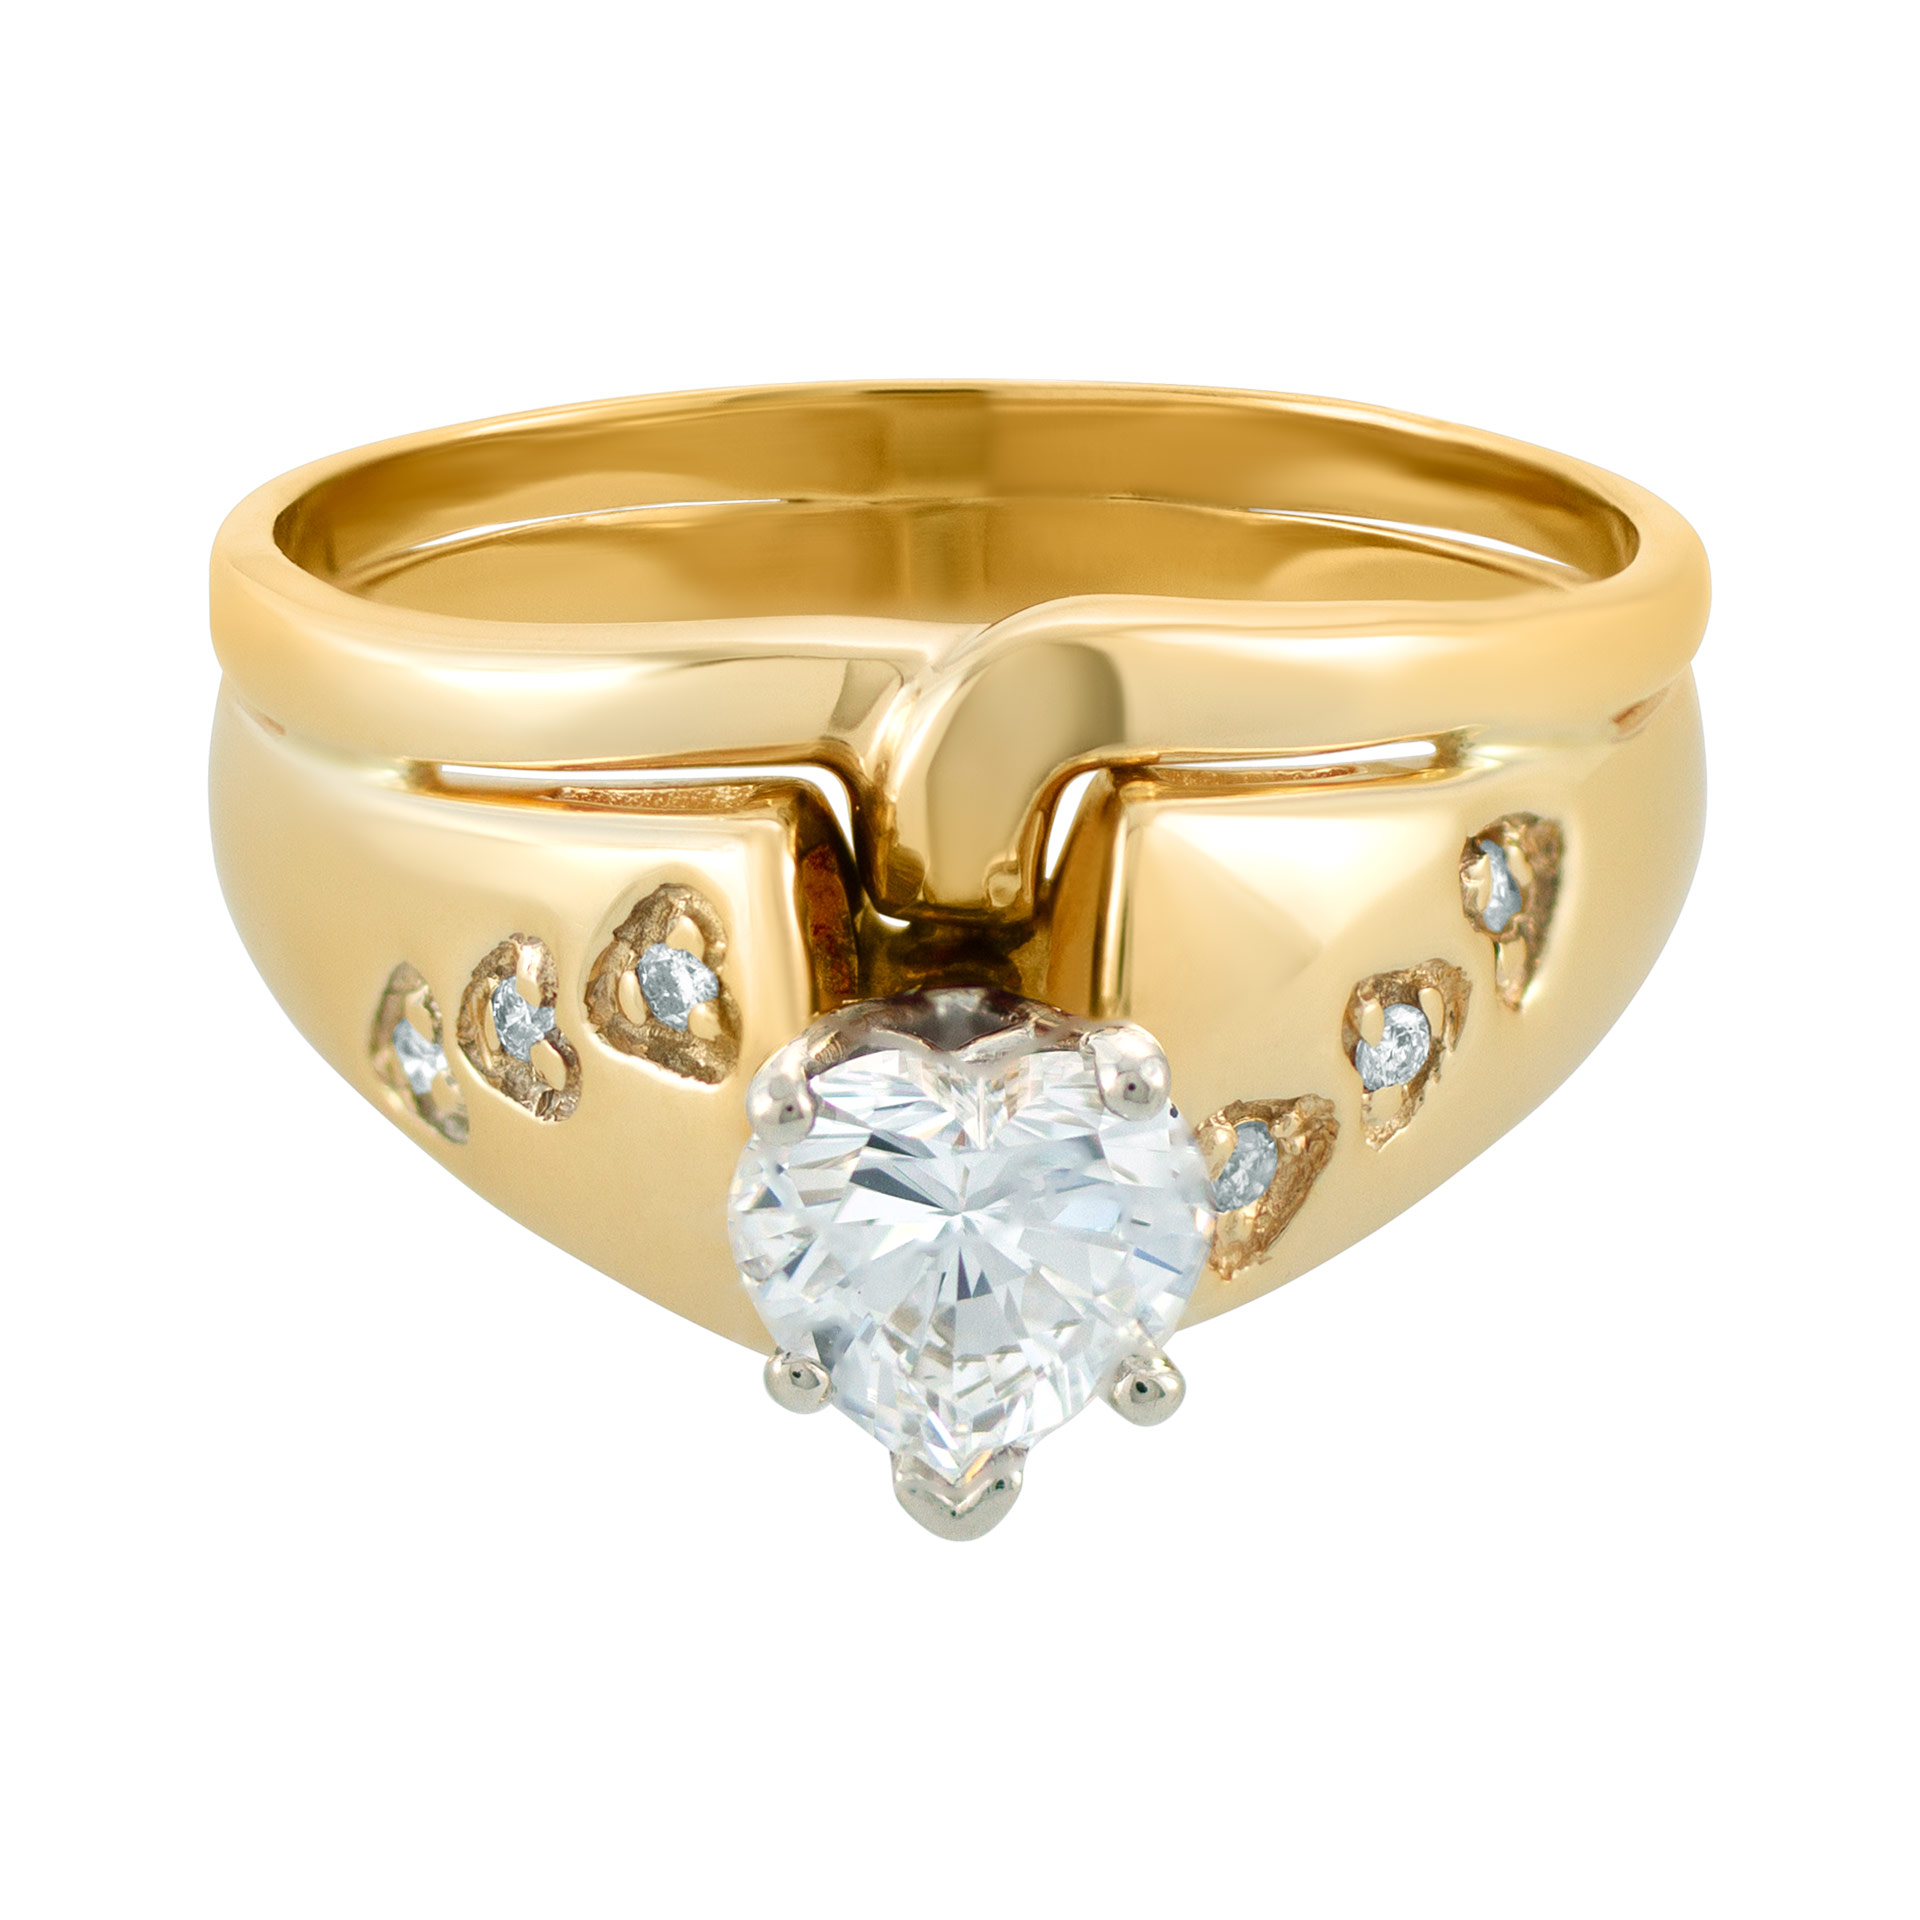 GIA certified heart-shaped diamond 1carat  (F color, VS2 clarity) ring set in 14k yellow gold. Size 10.5